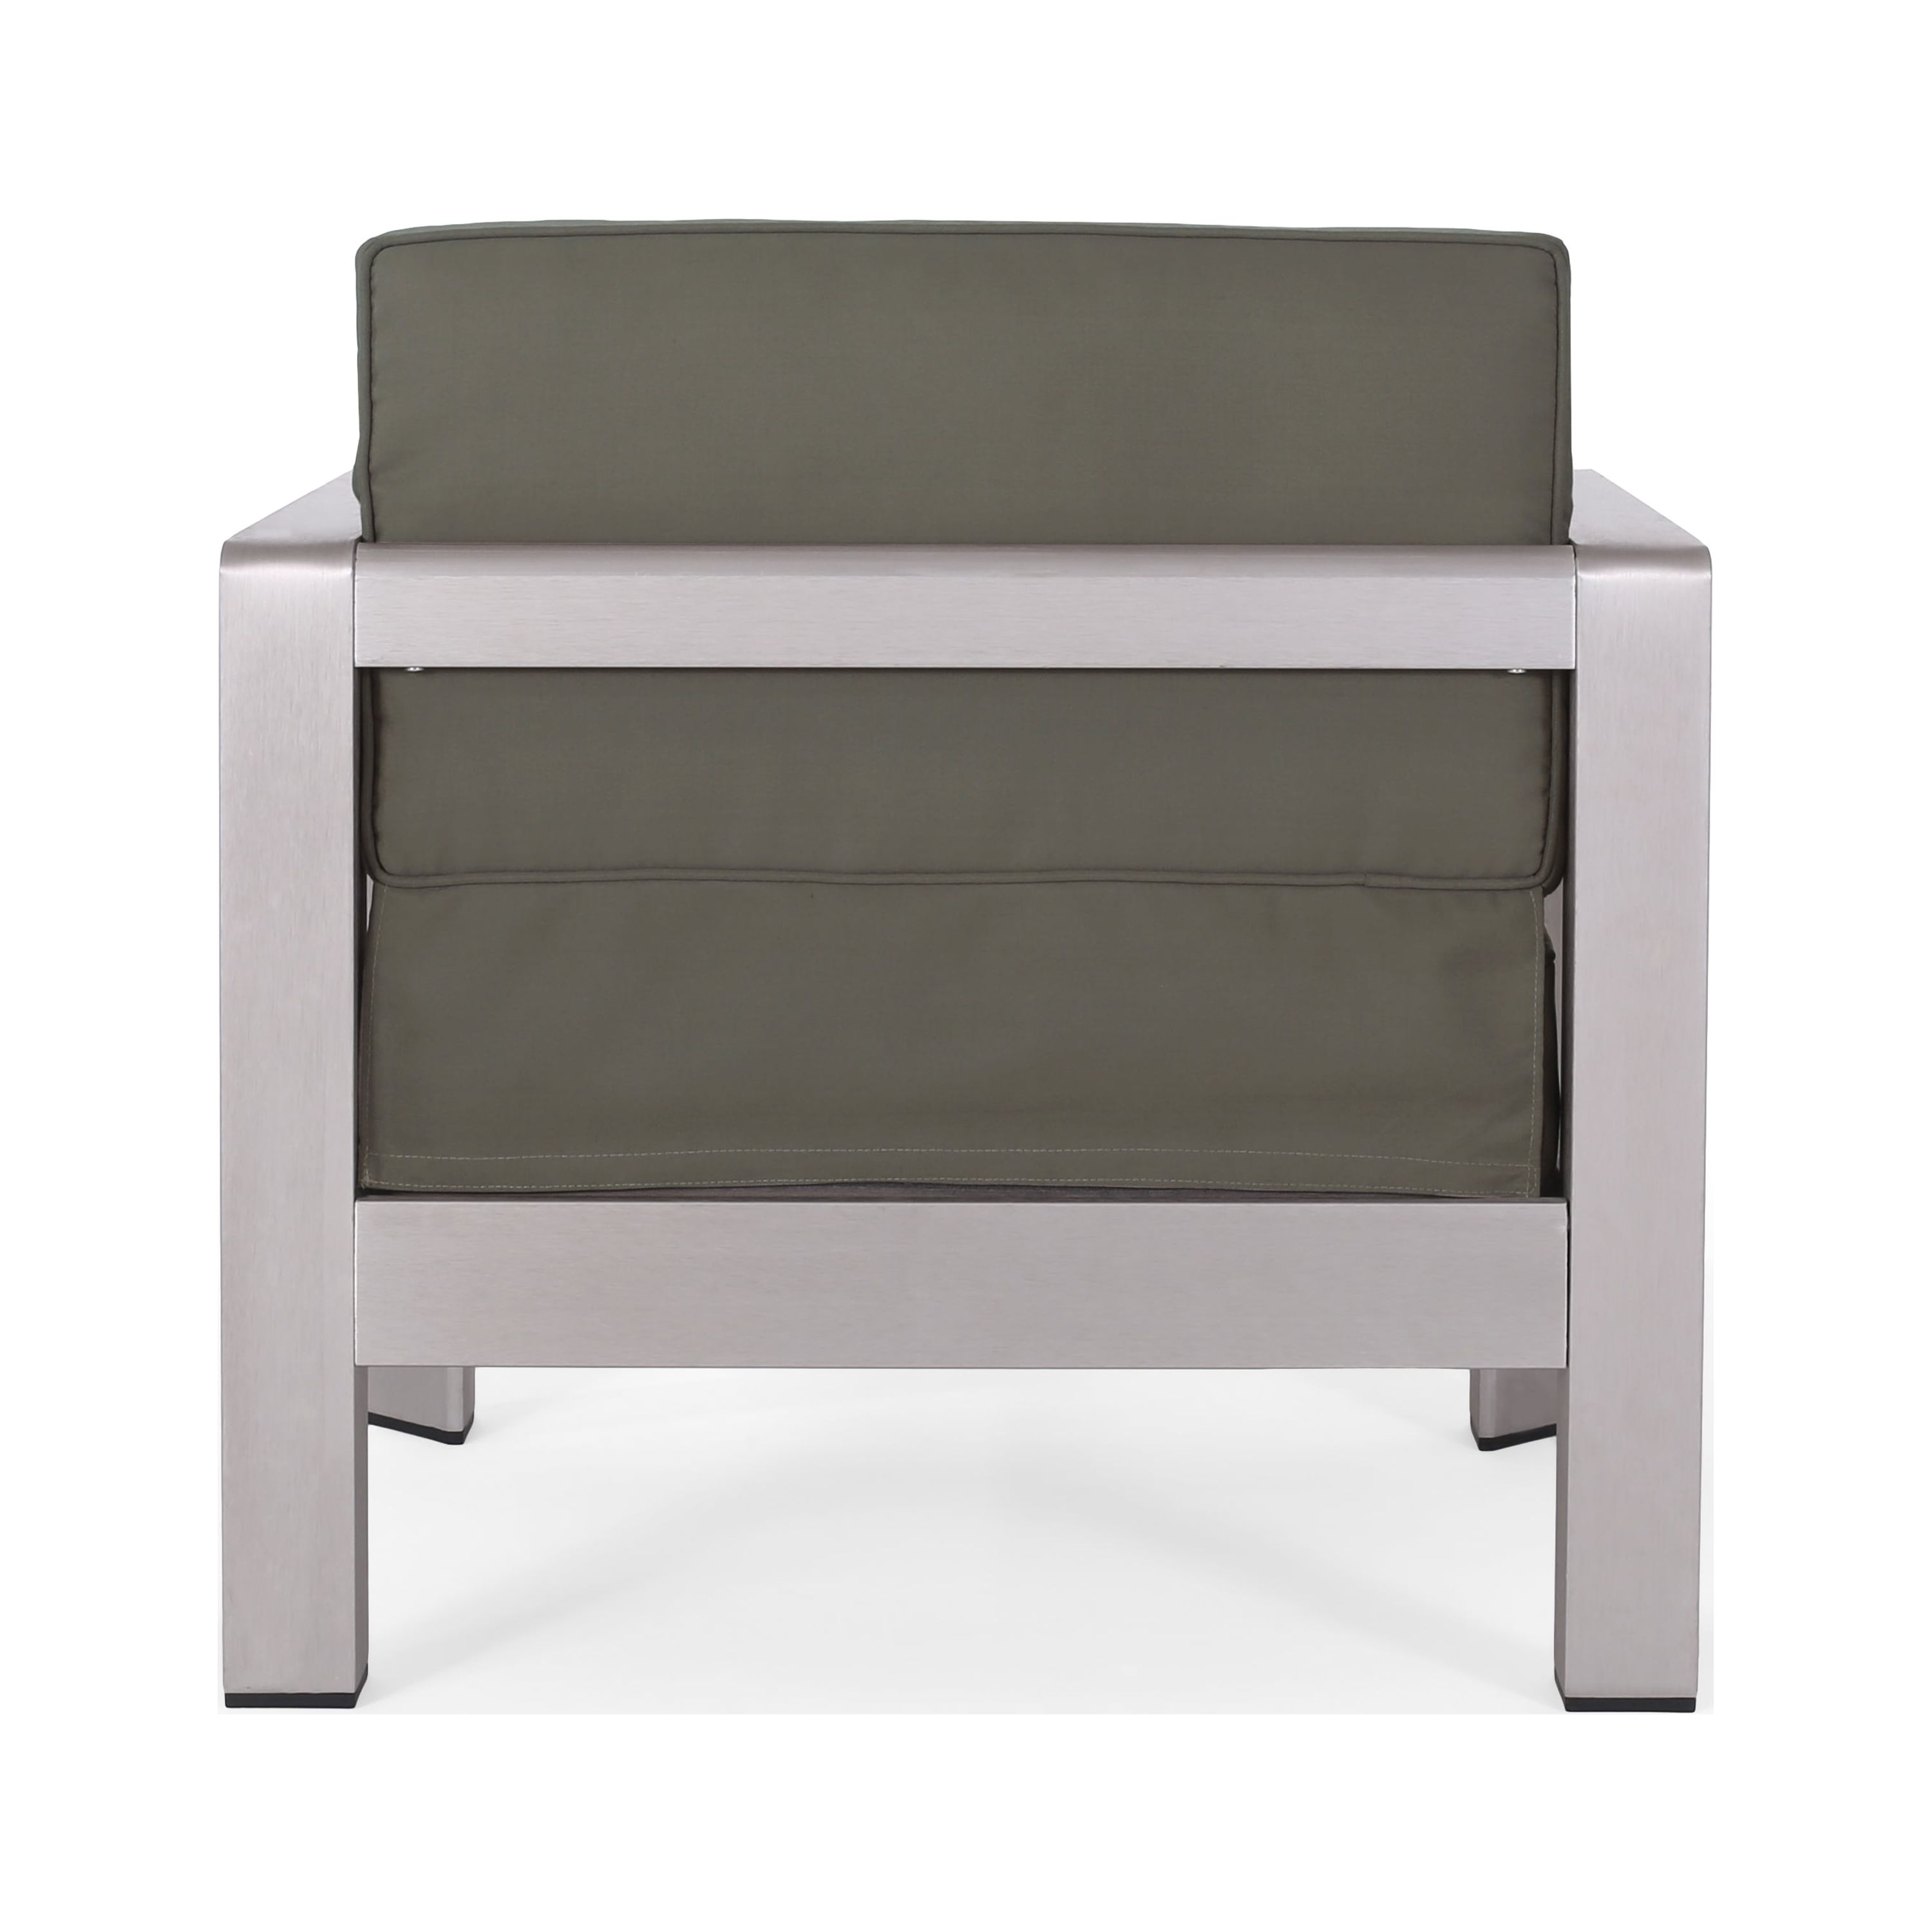 Darius Outdoor Aluminum Club Chairs with Side Table, Sliver, Khaki - image 5 of 10